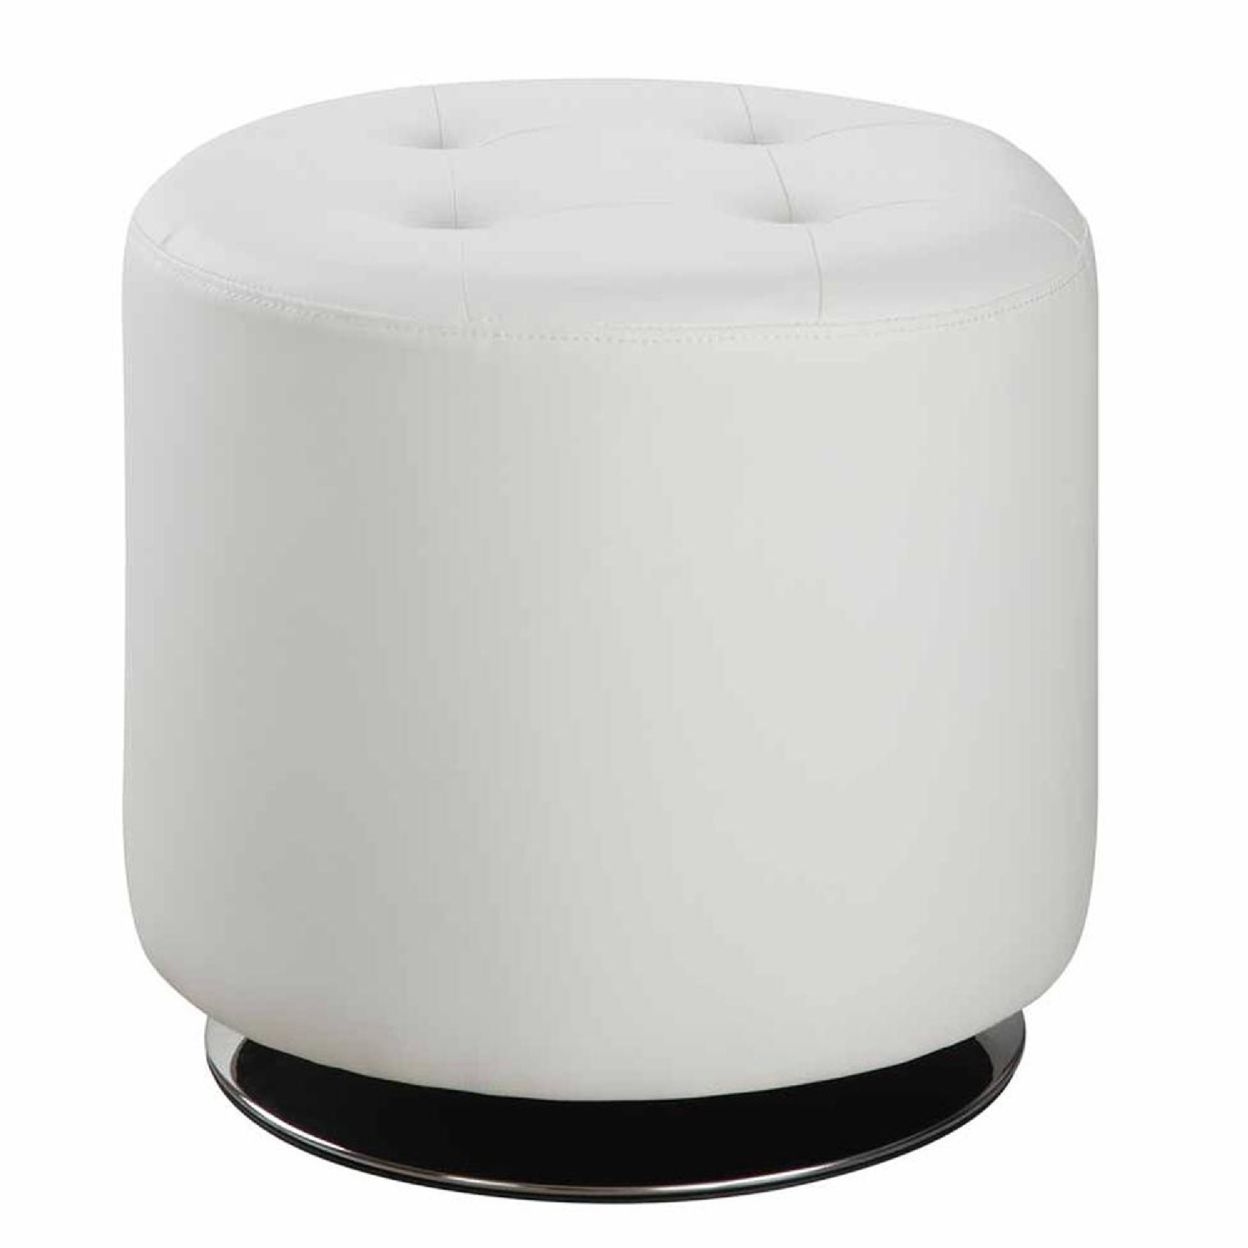 Round Leatherette Swivel Ottoman With Tufted Seat, White And Black | Ebay Throughout Onyx Black Modern Swivel Ottomans (View 18 of 18)